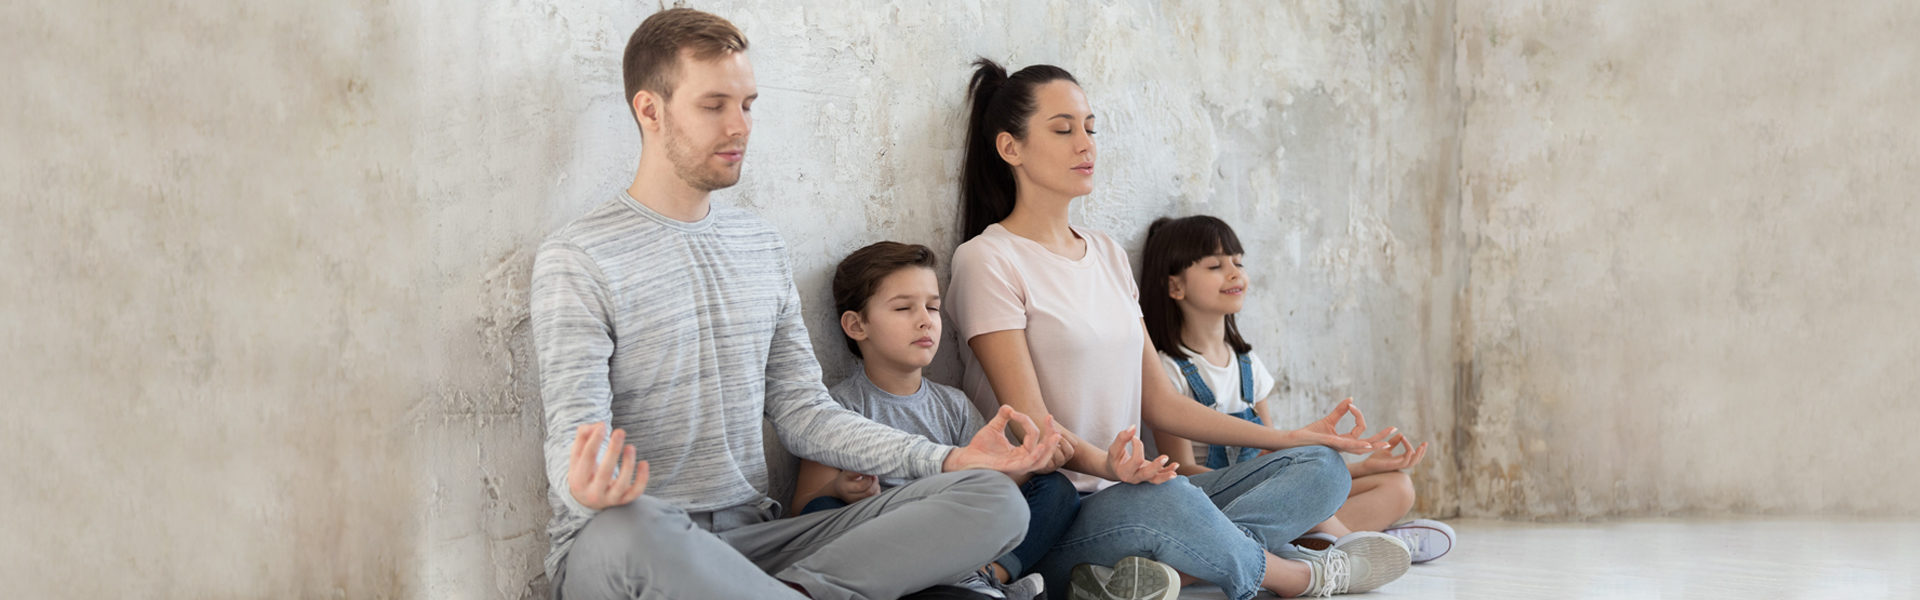 5 Steps to Follow for Improved Family Wellness